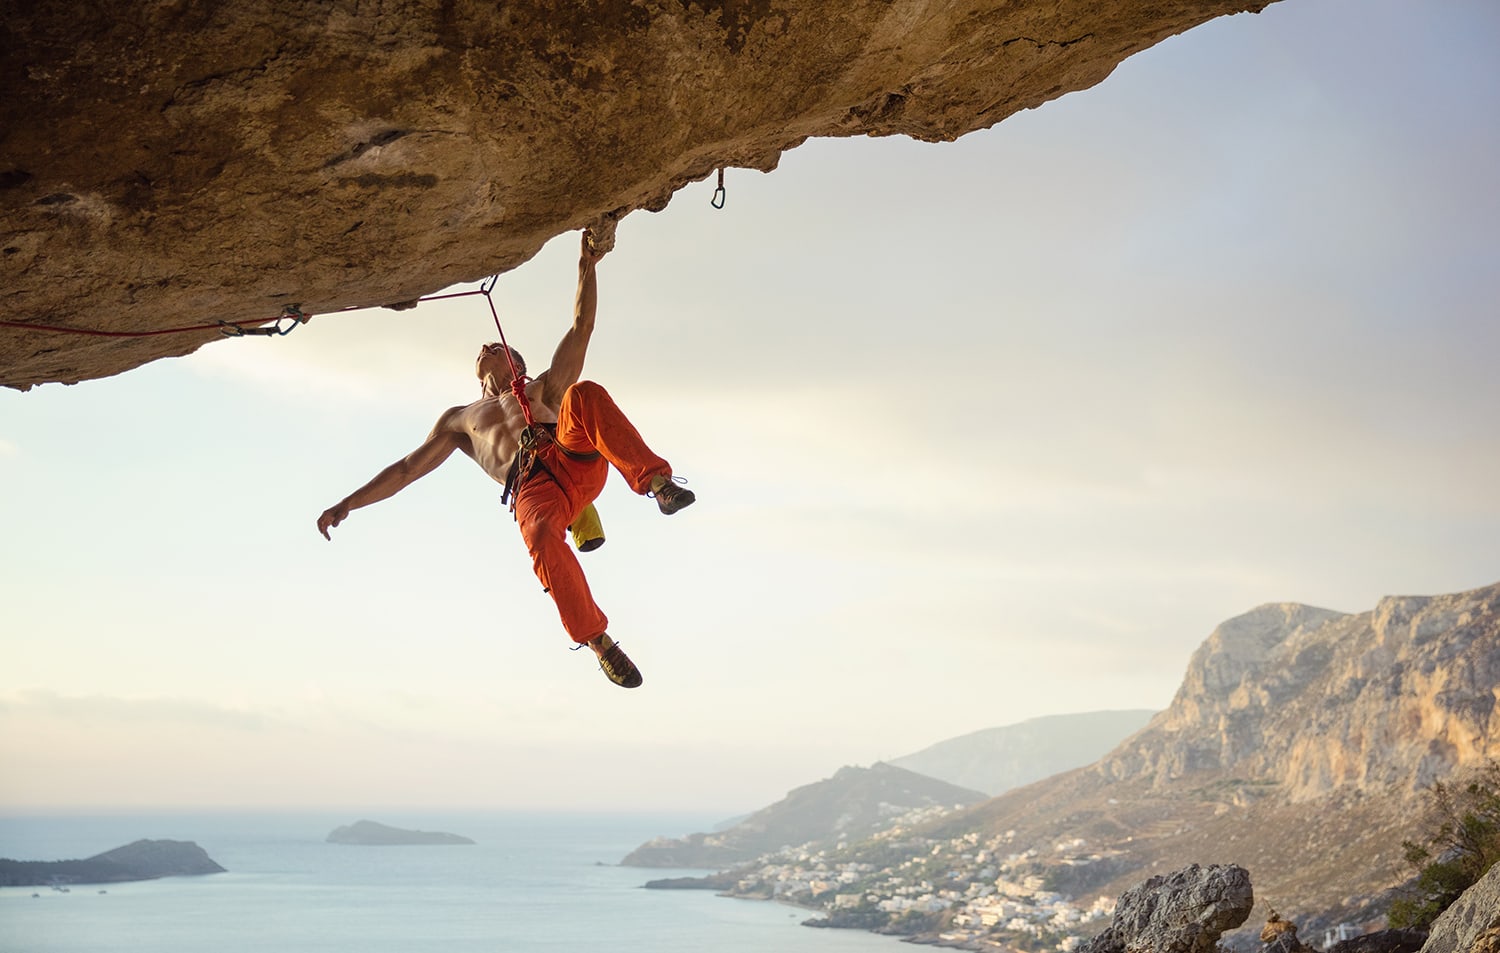 Young man climbing challenging route in cave against beautiful view of coast